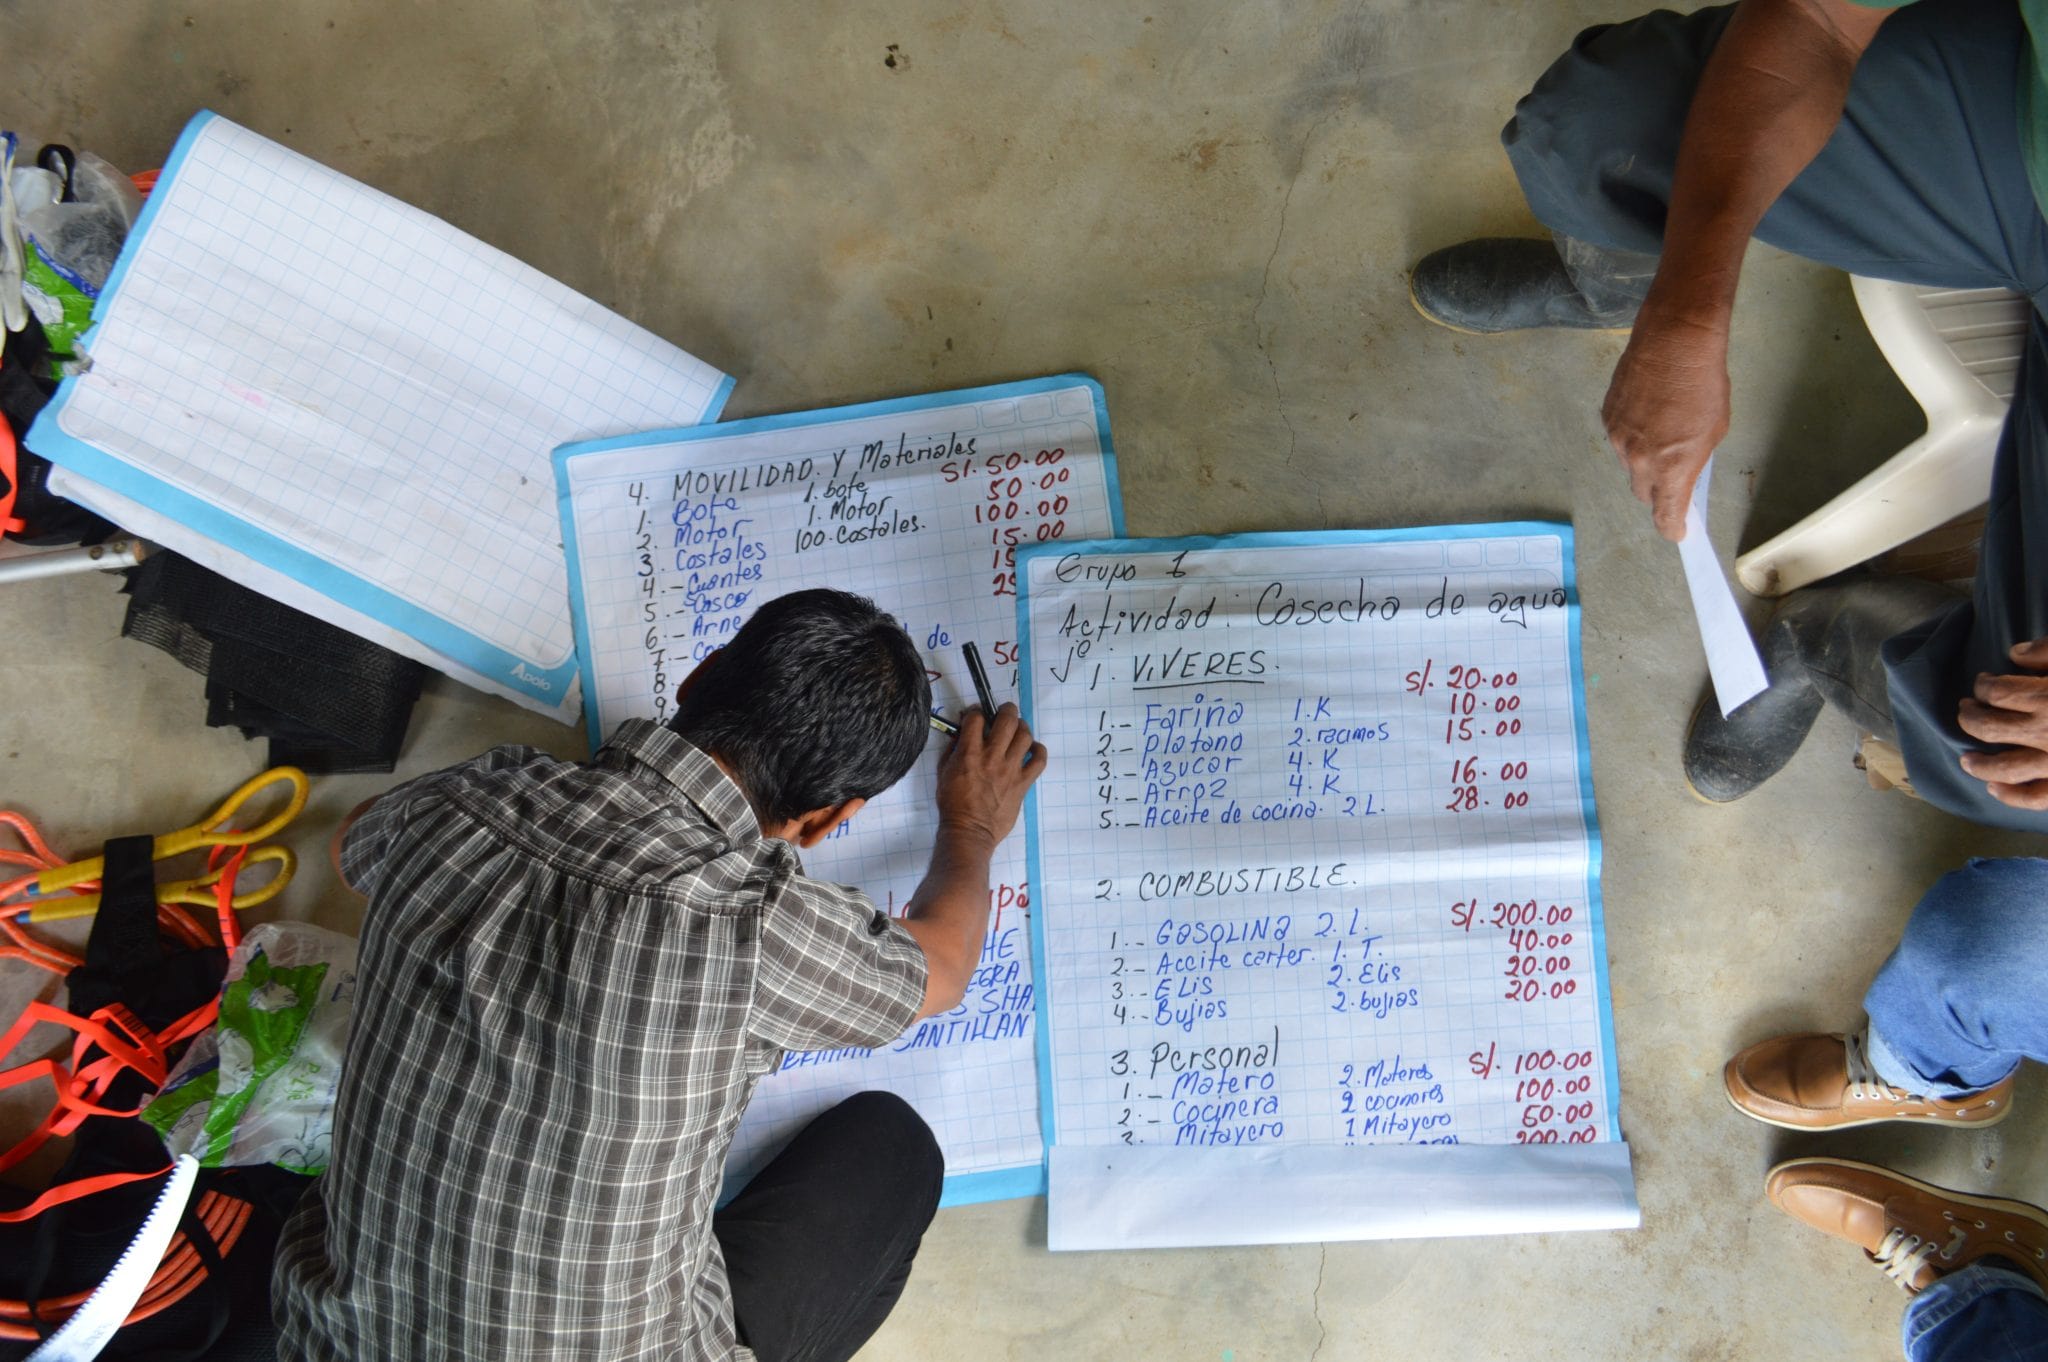 A member of the community calculates the harvest, transfer and sale of aguaje.